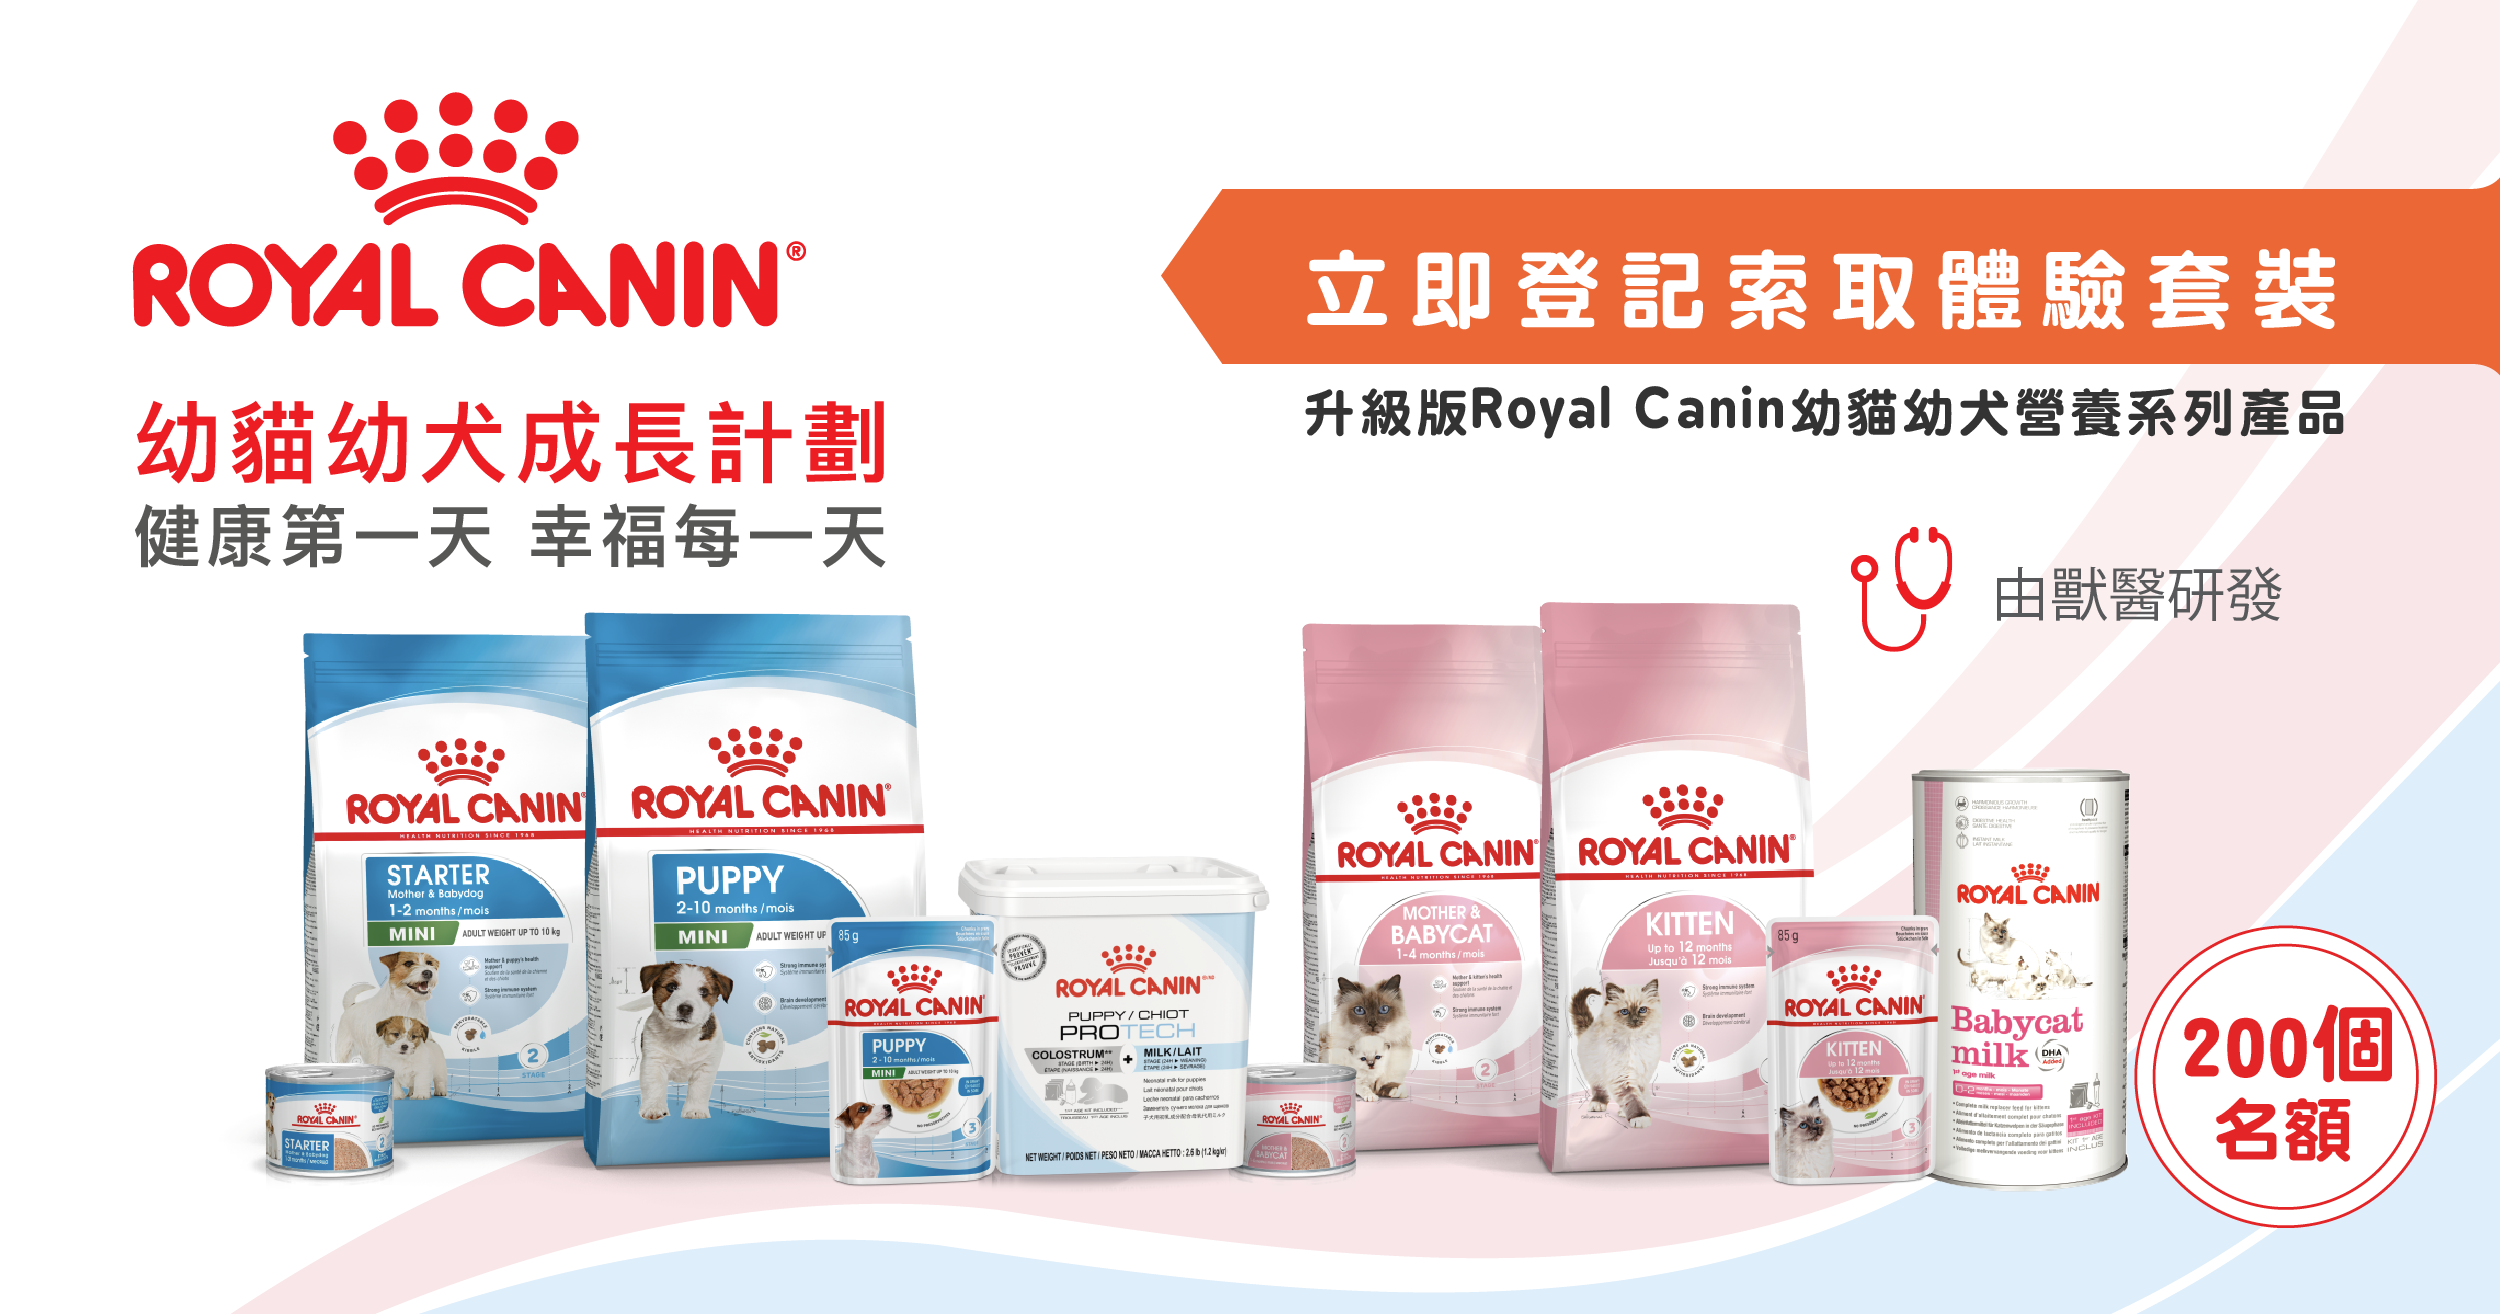 Royal Canin Puppy & Kitten Experience Pack Registration Form